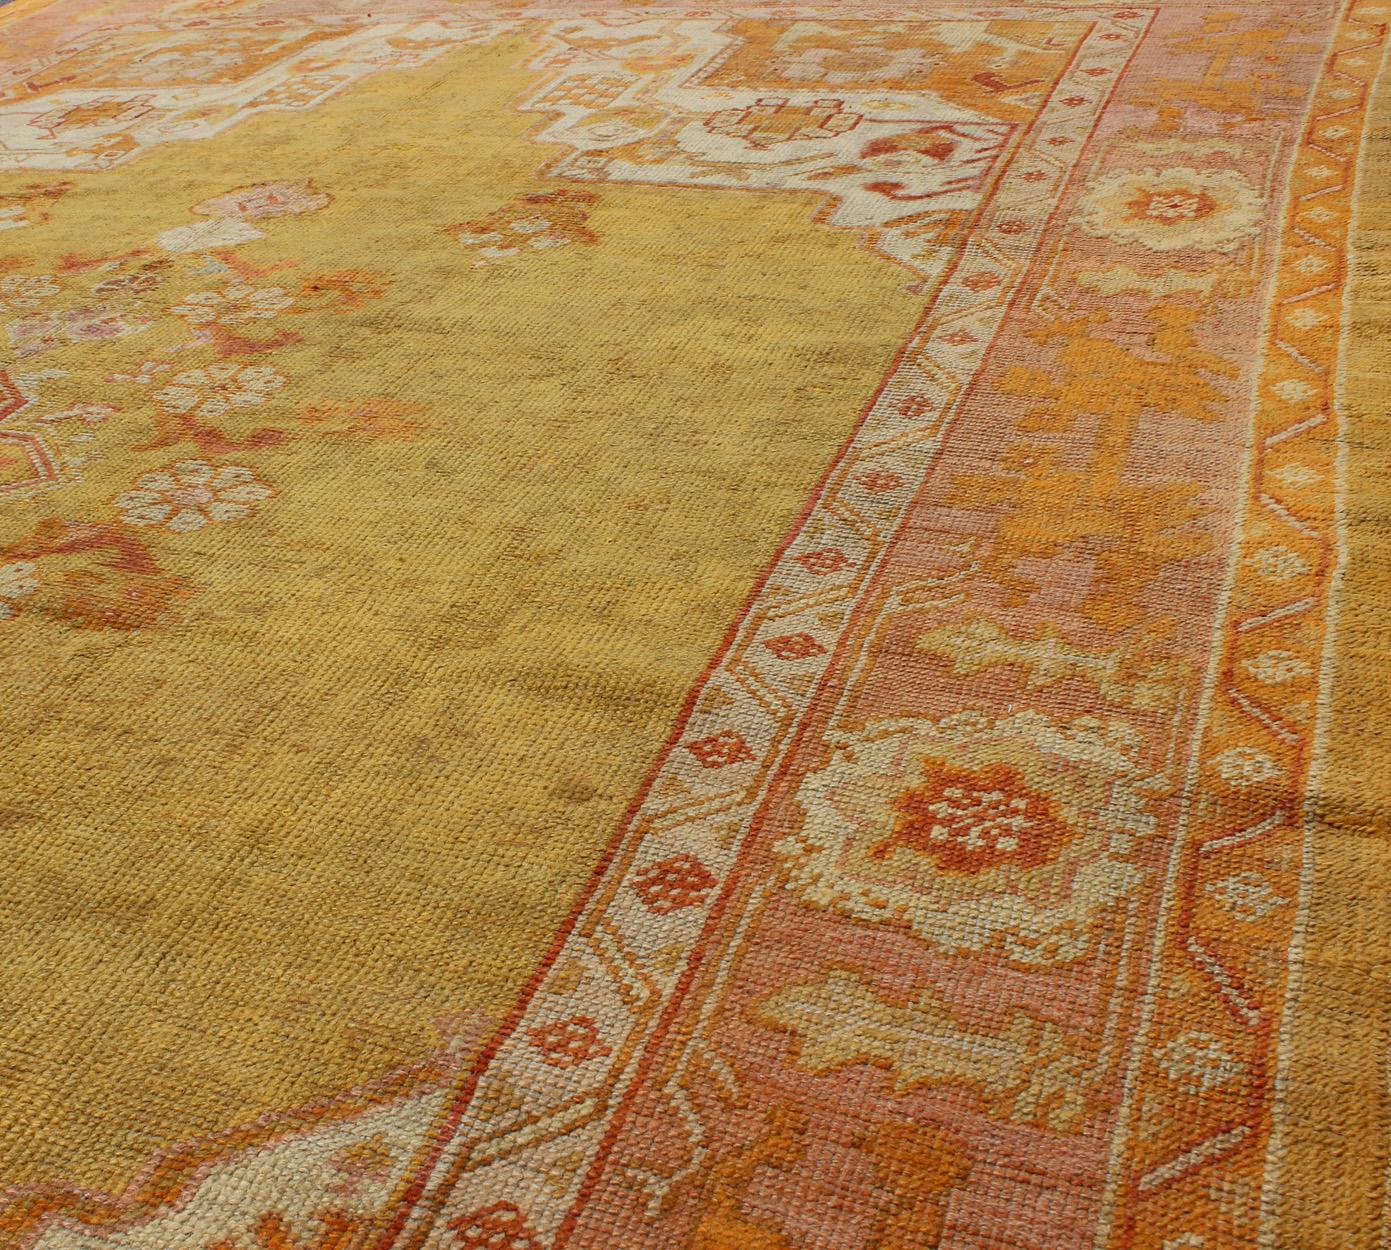 20th Century Antique Oushak Rug in Yellow Green Background, Pink Border, Red & Orange Accents For Sale